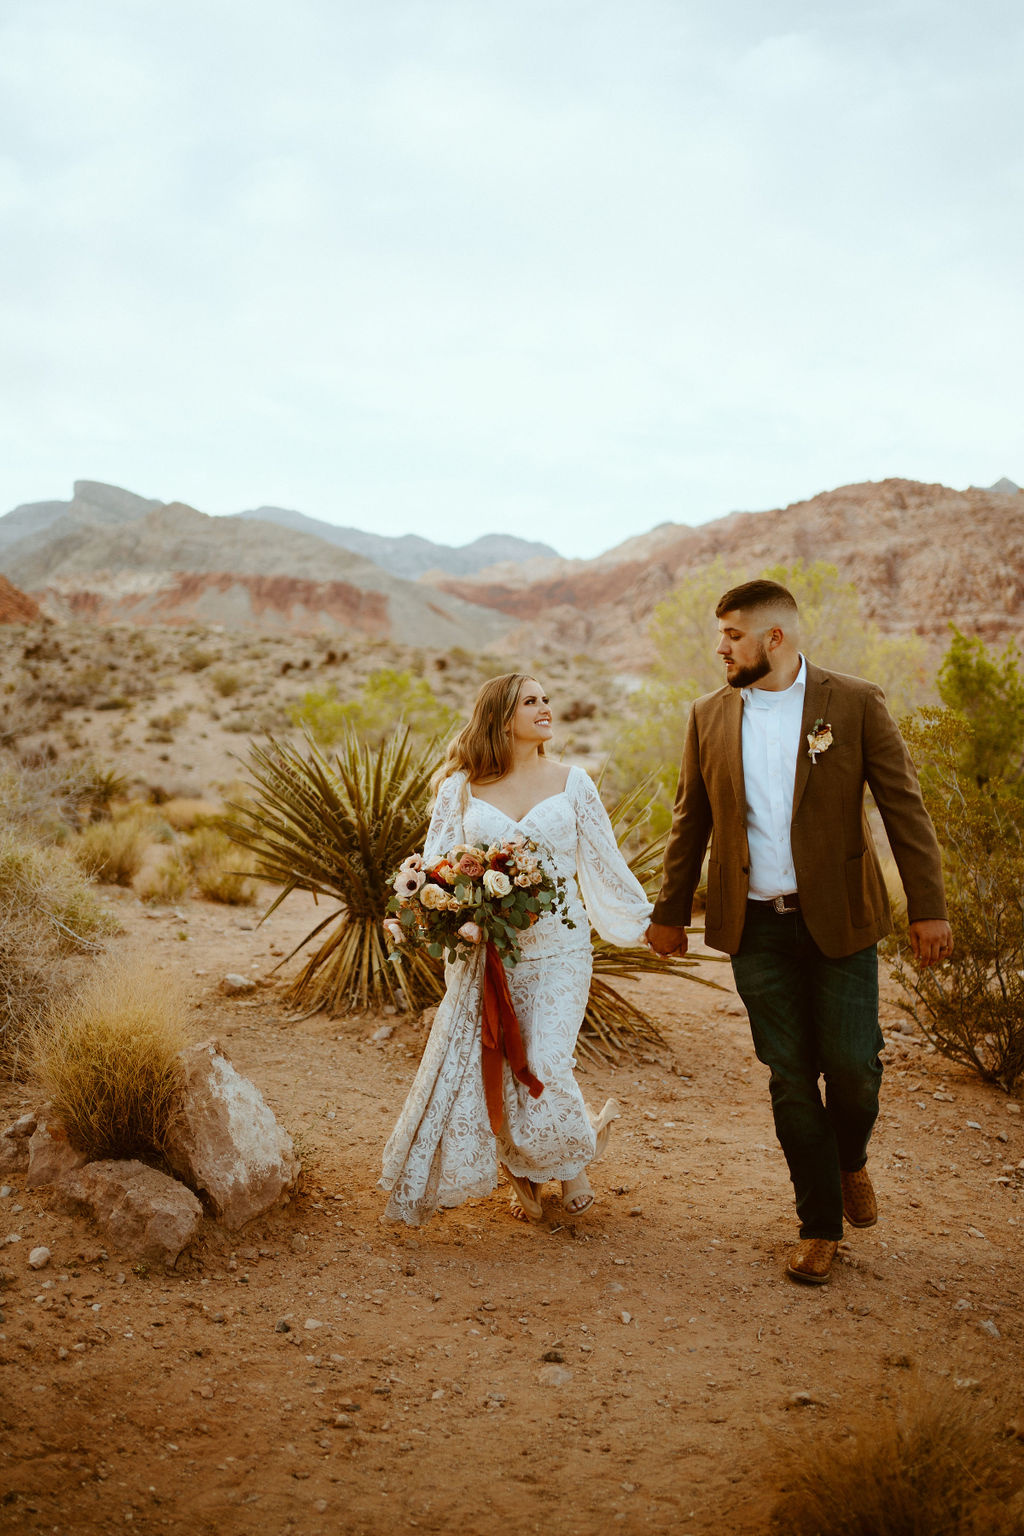 Rustic Boho Never Looked So Good! Walking hand in hand in the Las Vegas Desert with the Red Rock mountains behind. The bride wears a fitted white lace boho styled dress with large puffy sleaves. She holds a rustic orange, peach, pink and toffee bridal bouquet. The groom wears a dark brown suit jacket with dark fitted blue jeans and white shirt. 